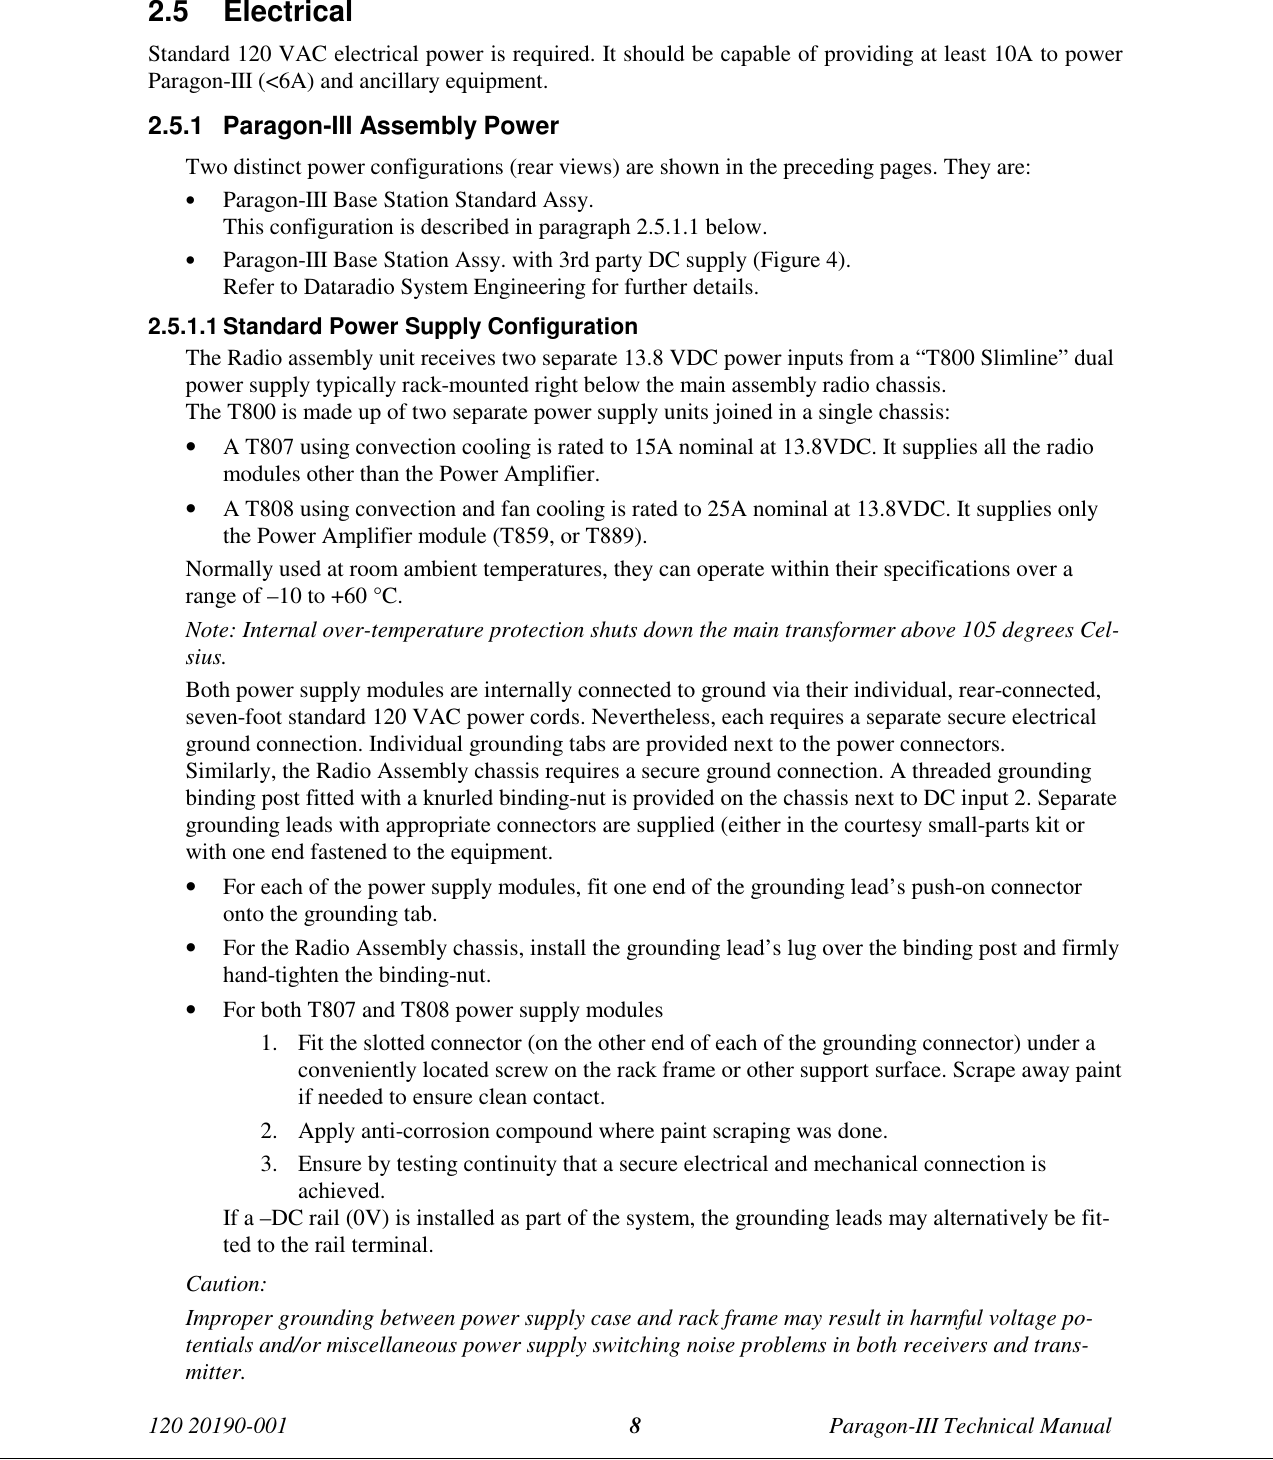 120 20190-001 Paragon-III Technical Manual82.5 ElectricalStandard 120 VAC electrical power is required. It should be capable of providing at least 10A to powerParagon-III (&lt;6A) and ancillary equipment.2.5.1  Paragon-III Assembly PowerTwo distinct power configurations (rear views) are shown in the preceding pages. They are:• Paragon-III Base Station Standard Assy.This configuration is described in paragraph 2.5.1.1 below.• Paragon-III Base Station Assy. with 3rd party DC supply (Figure 4).Refer to Dataradio System Engineering for further details.2.5.1.1 Standard Power Supply ConfigurationThe Radio assembly unit receives two separate 13.8 VDC power inputs from a “T800 Slimline” dualpower supply typically rack-mounted right below the main assembly radio chassis.The T800 is made up of two separate power supply units joined in a single chassis:• A T807 using convection cooling is rated to 15A nominal at 13.8VDC. It supplies all the radiomodules other than the Power Amplifier.• A T808 using convection and fan cooling is rated to 25A nominal at 13.8VDC. It supplies onlythe Power Amplifier module (T859, or T889).Normally used at room ambient temperatures, they can operate within their specifications over arange of –10 to +60 °C.Note: Internal over-temperature protection shuts down the main transformer above 105 degrees Cel-sius.Both power supply modules are internally connected to ground via their individual, rear-connected,seven-foot standard 120 VAC power cords. Nevertheless, each requires a separate secure electricalground connection. Individual grounding tabs are provided next to the power connectors.Similarly, the Radio Assembly chassis requires a secure ground connection. A threaded groundingbinding post fitted with a knurled binding-nut is provided on the chassis next to DC input 2. Separategrounding leads with appropriate connectors are supplied (either in the courtesy small-parts kit orwith one end fastened to the equipment.• For each of the power supply modules, fit one end of the grounding lead’s push-on connectoronto the grounding tab.• For the Radio Assembly chassis, install the grounding lead’s lug over the binding post and firmlyhand-tighten the binding-nut.• For both T807 and T808 power supply modules1. Fit the slotted connector (on the other end of each of the grounding connector) under aconveniently located screw on the rack frame or other support surface. Scrape away paintif needed to ensure clean contact.2. Apply anti-corrosion compound where paint scraping was done.3. Ensure by testing continuity that a secure electrical and mechanical connection isachieved.If a –DC rail (0V) is installed as part of the system, the grounding leads may alternatively be fit-ted to the rail terminal.Caution:Improper grounding between power supply case and rack frame may result in harmful voltage po-tentials and/or miscellaneous power supply switching noise problems in both receivers and trans-mitter.